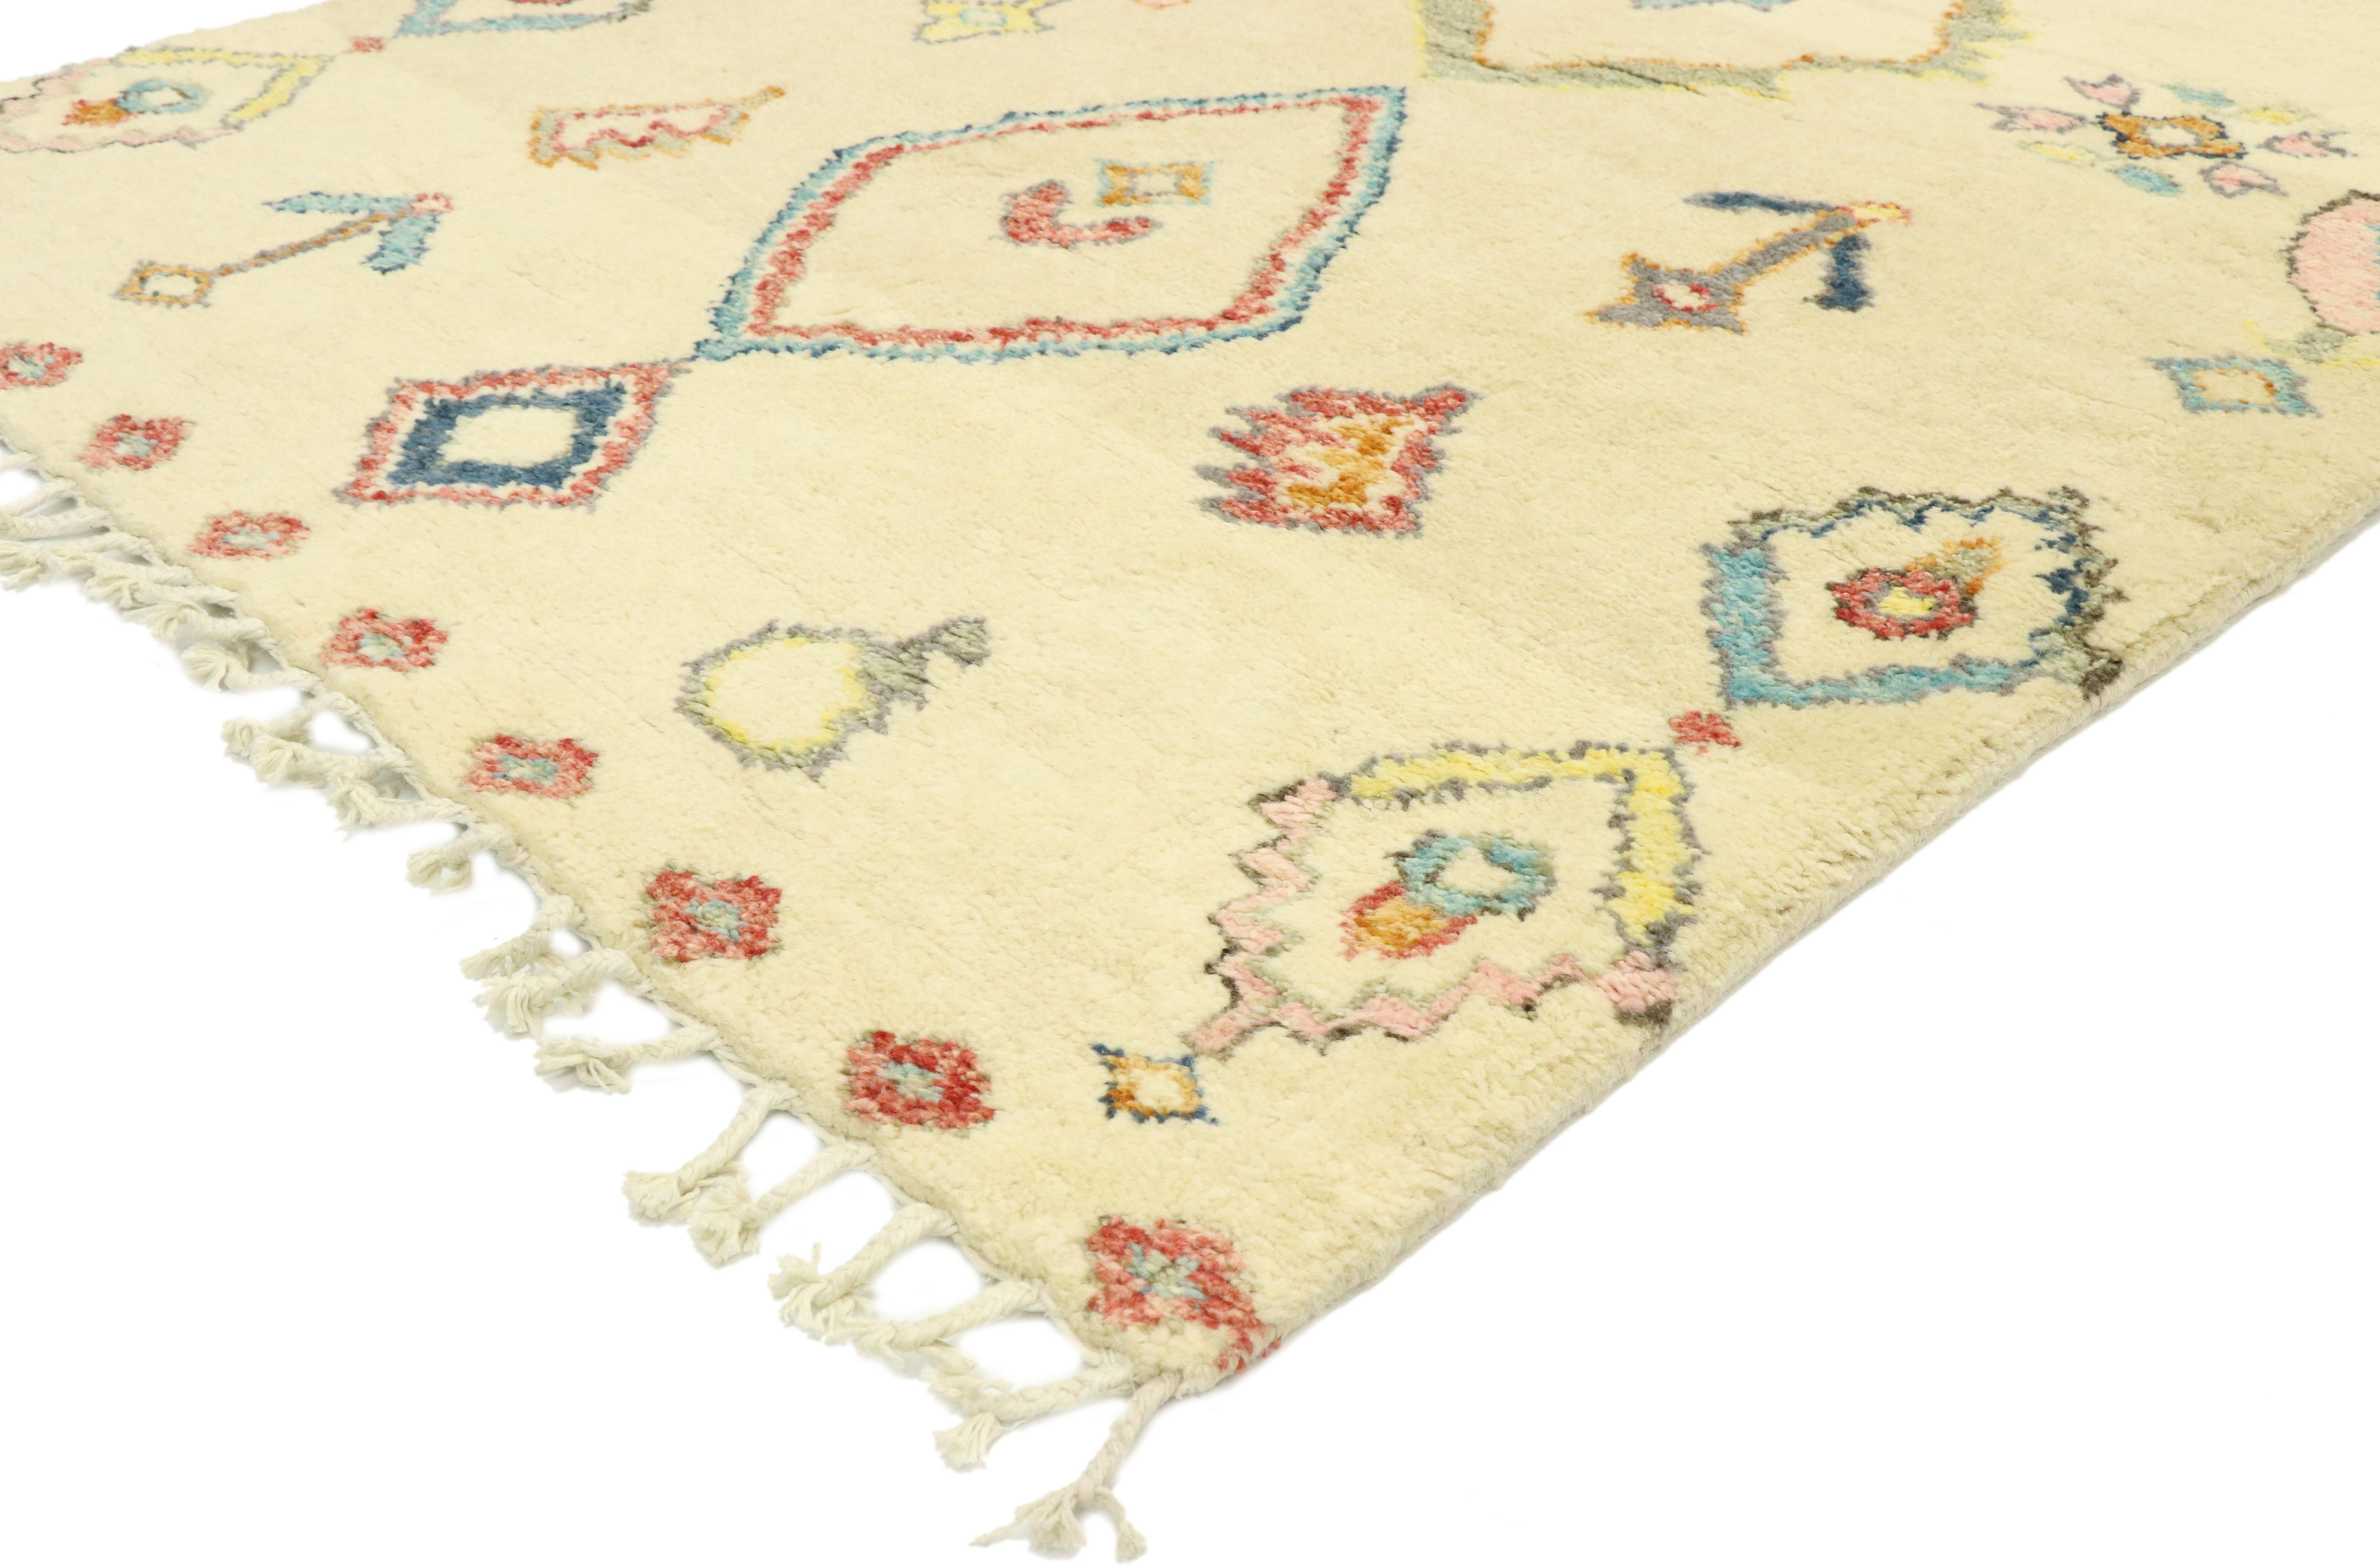 80620 Colorful Bohemian Moroccan Rug Runner, 04'00 x 12'02. 
Cozy Boho meets eclectic jungalow in this hand knotted wool colorful Moroccan rug. The whimsical diamond design and happy hues woven into this piece work creating an ultra cozy feeling